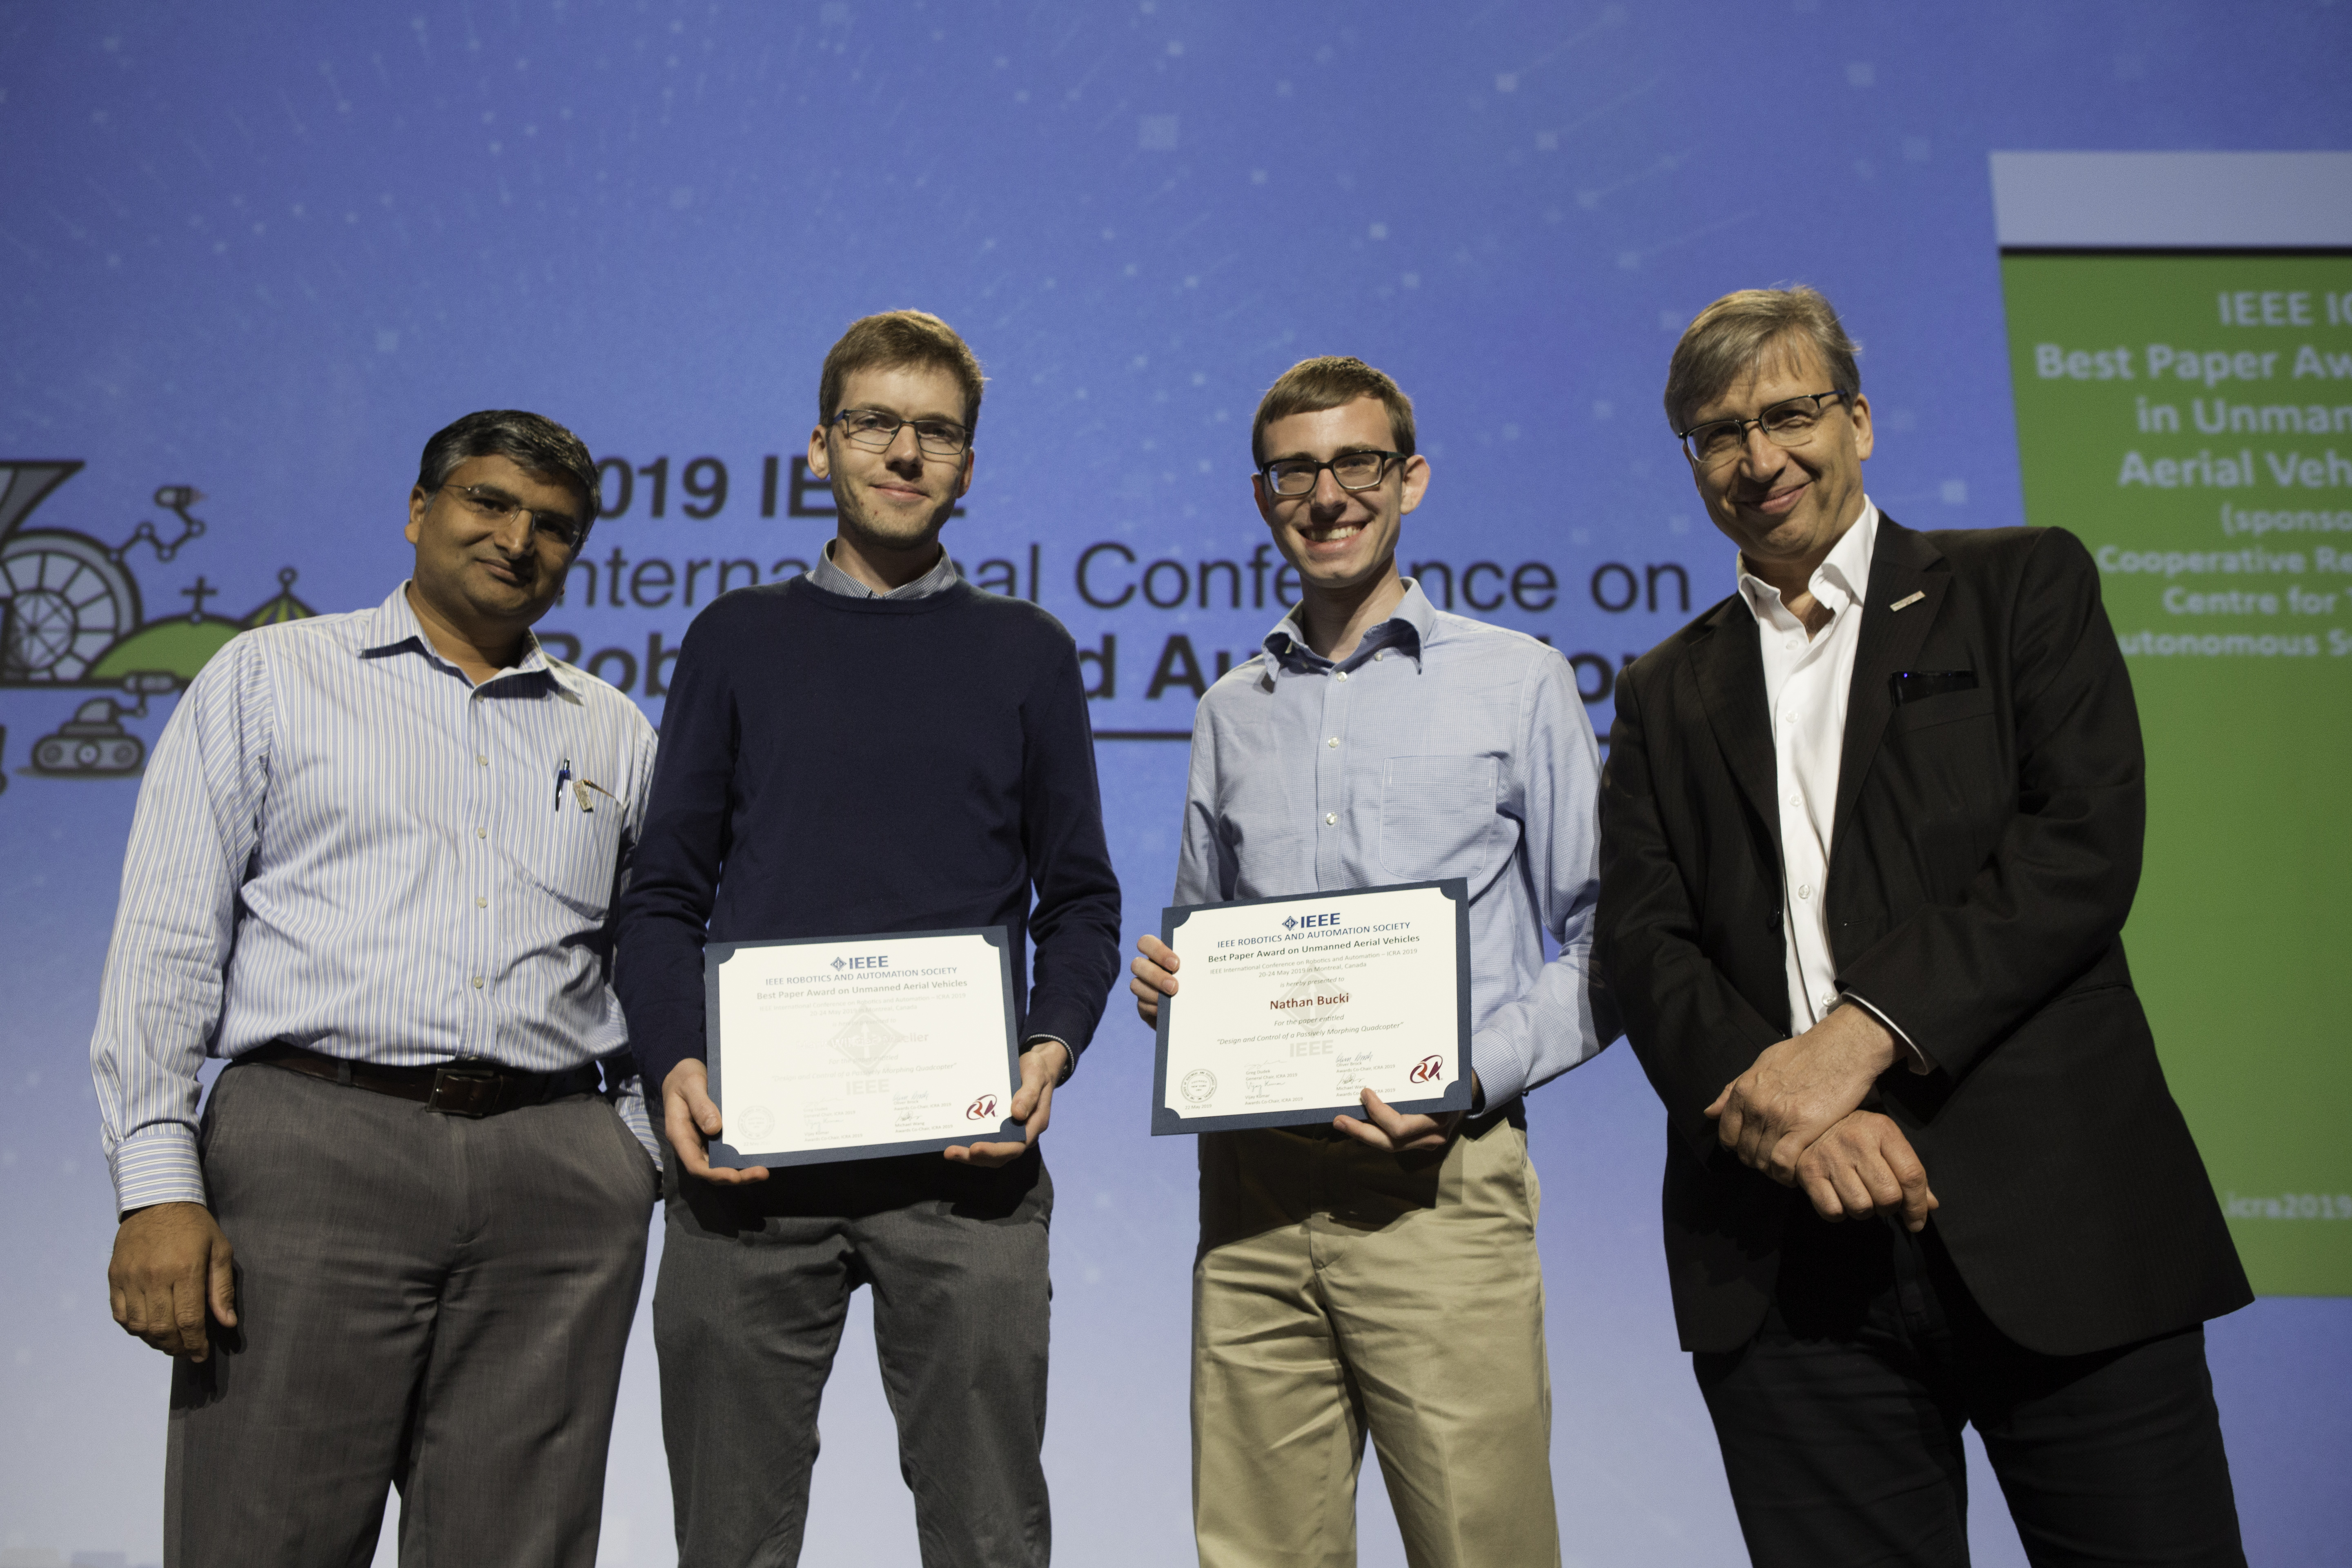 Best Paper Award on Unmanned Aerial Vehicles 